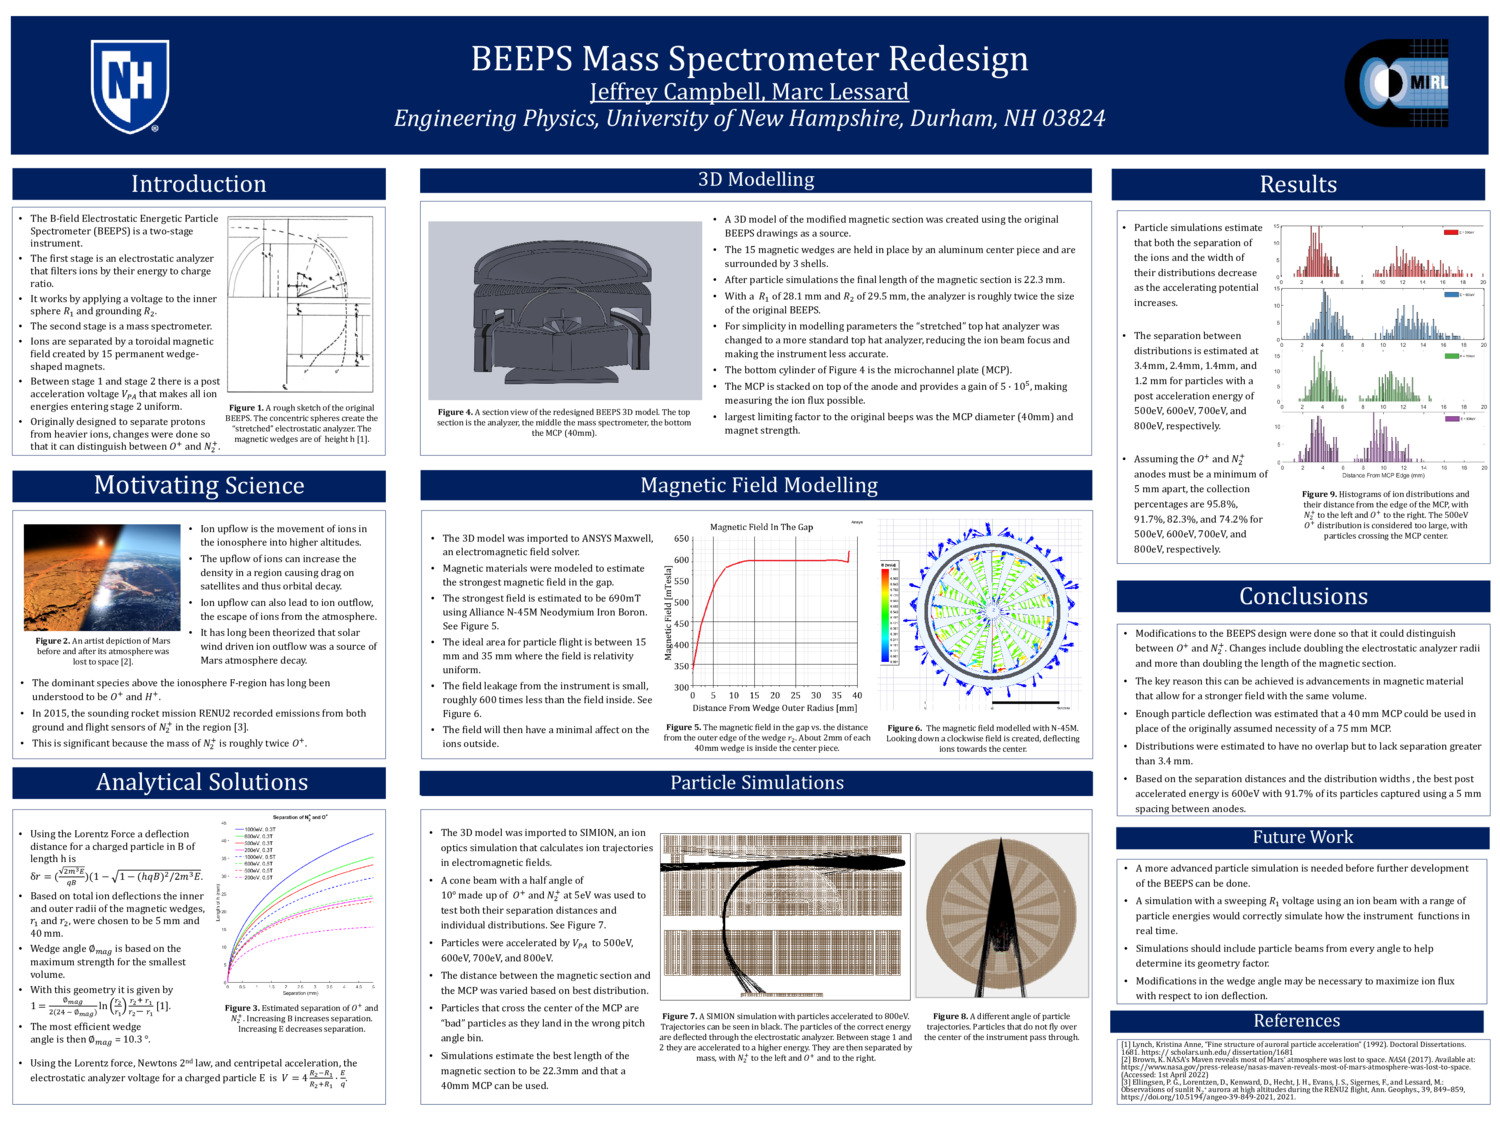 Beeps Mass Spectrometer Redesign by jlc1144